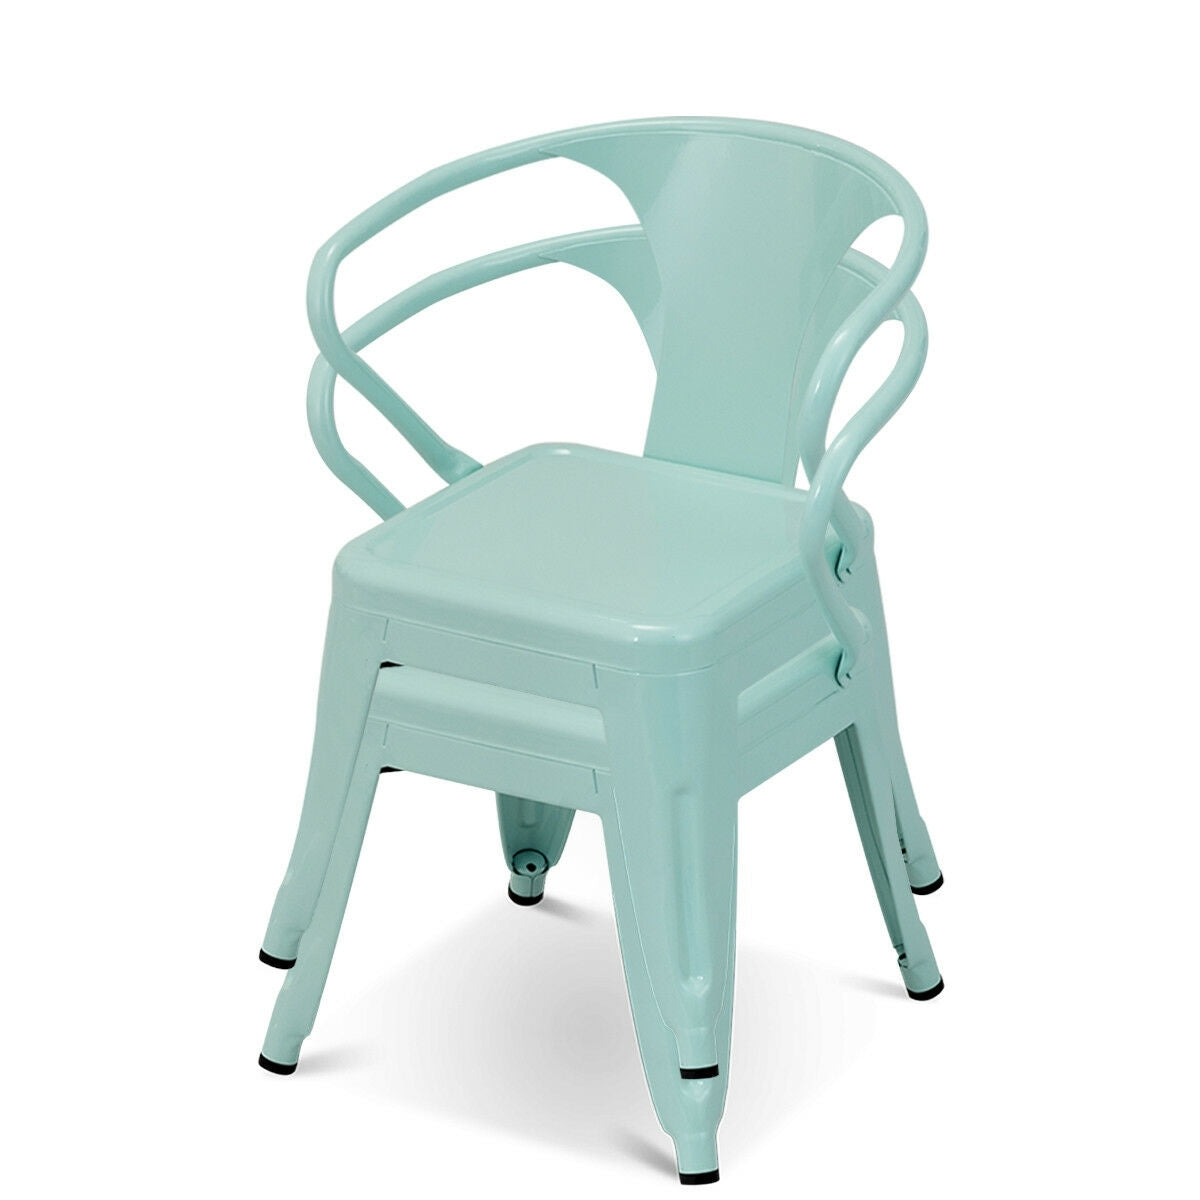 Set of 2 Steel Armchair Stackable Kids Chairs-Green - Color: Green